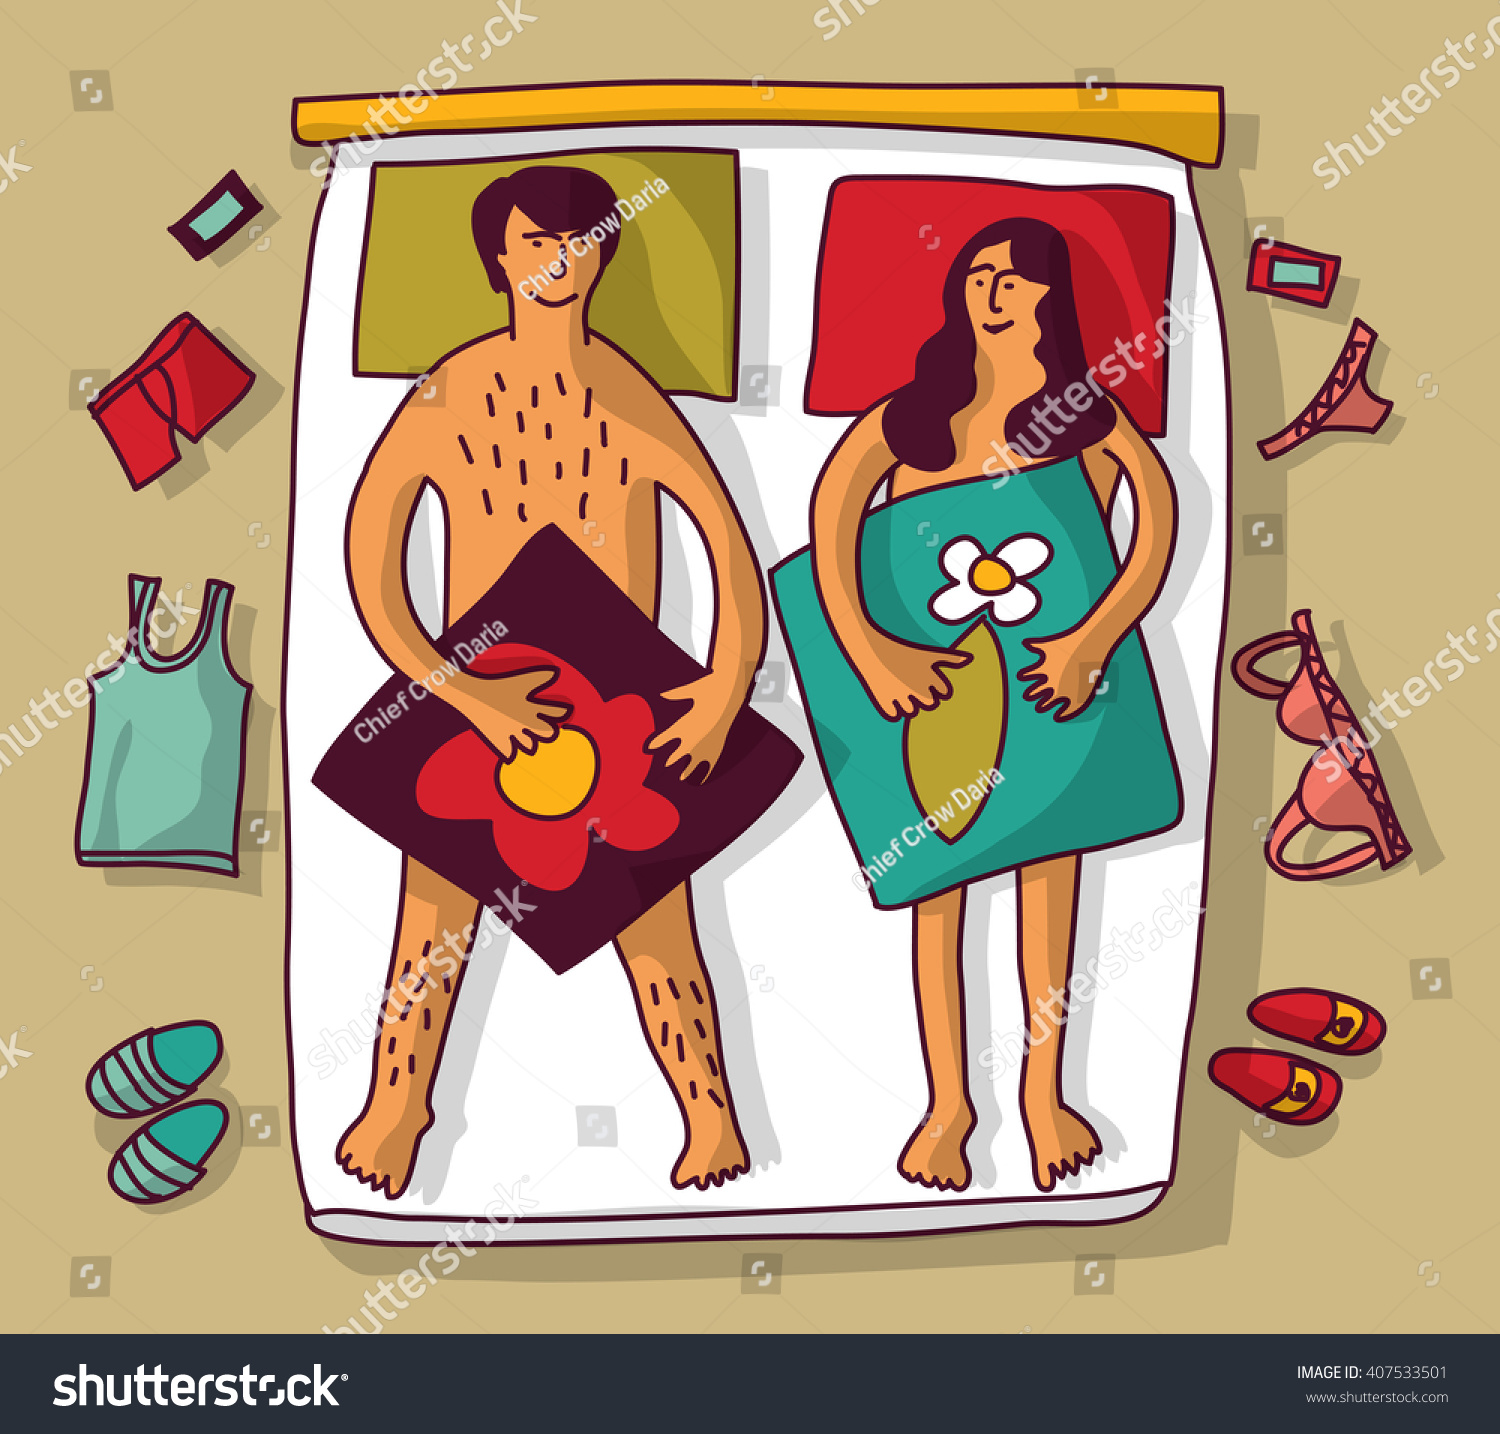 Man Woman Couple Naked Sex Relations Stock Vector Royalty Free 407533501 Shutterstock